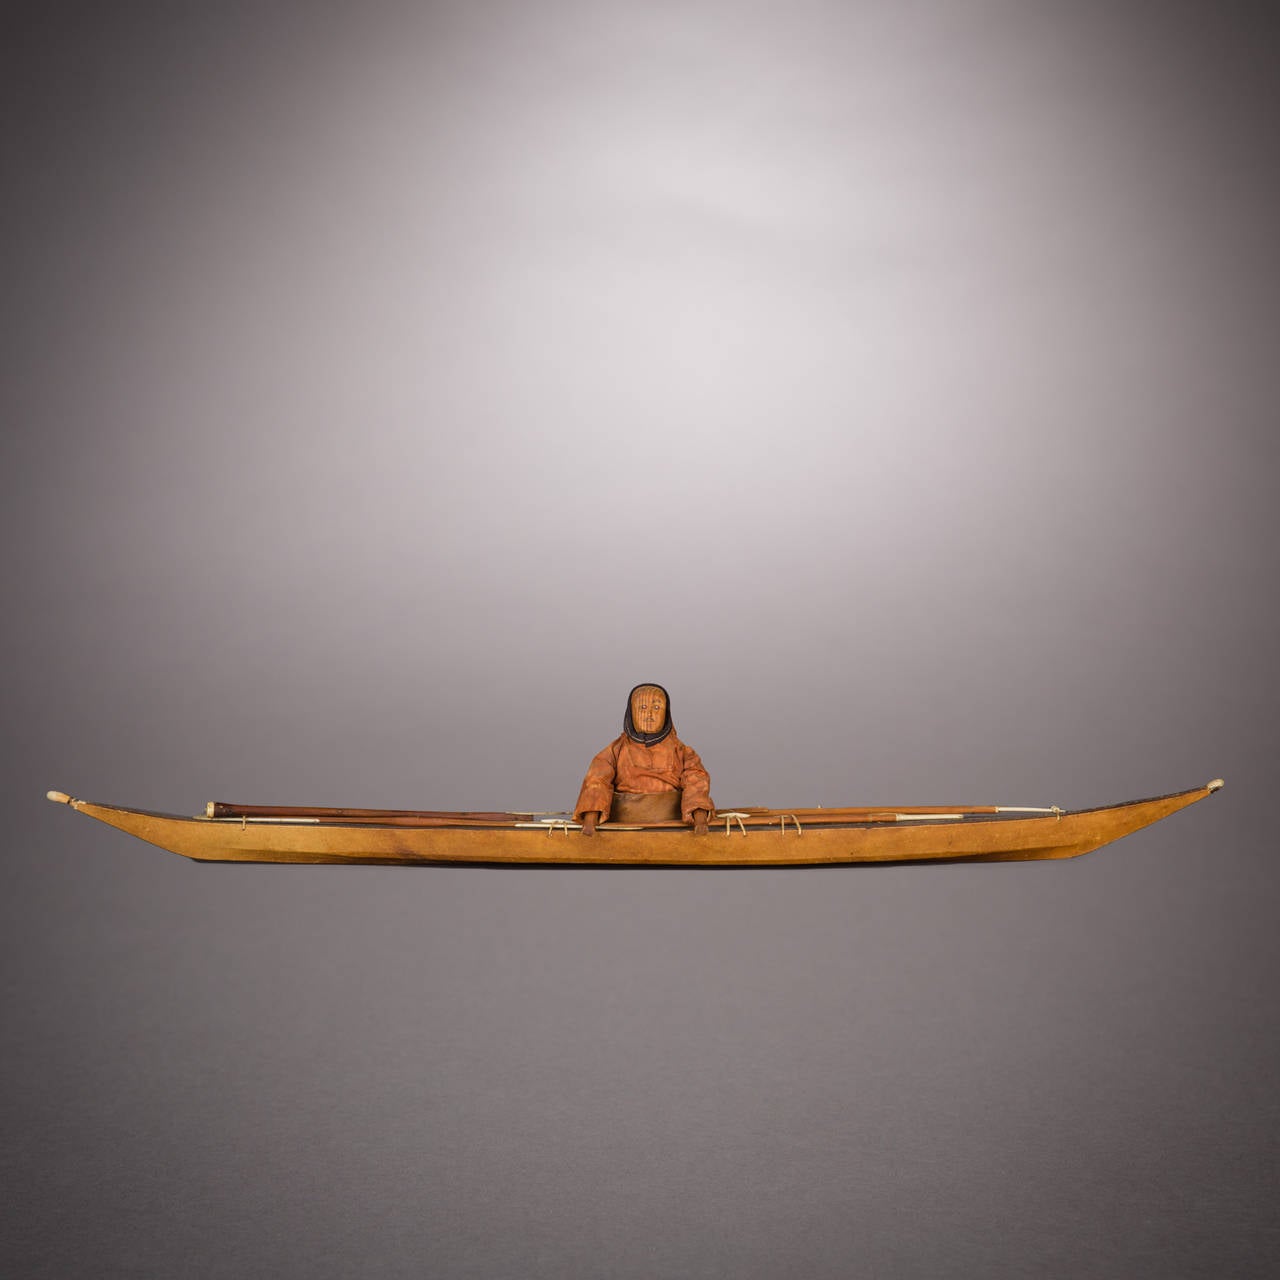 This is a splendid and uncommonly large model of a Greenland kayak, amply illustrating a substantial complement of hunting gear and a pilot's set of waterproof garments. Carefully worked ivory was used to detail various equipment elements and